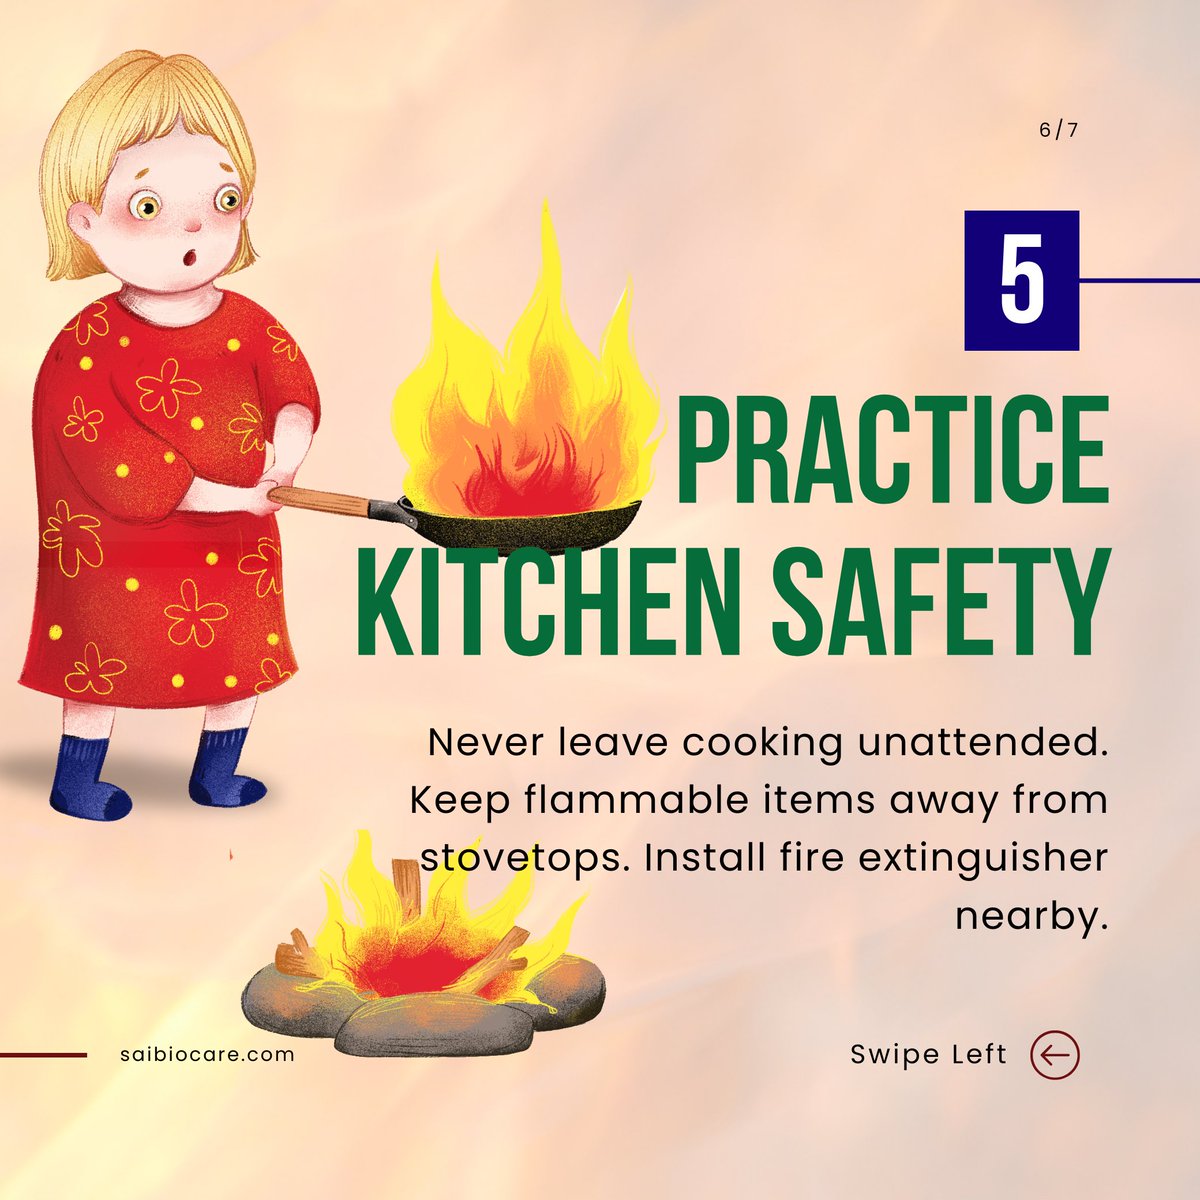 Fire safety starts at home: alarms, escape plans, clear pathways, extinguishers, and kitchen precautions ensure a safer environment for everyone.
.
#firesafety #FireSafetyTips #homesafety #fireprevention #safetyfirst #firedrills #kitchensafety #EmergencyPreparedness #familysafety